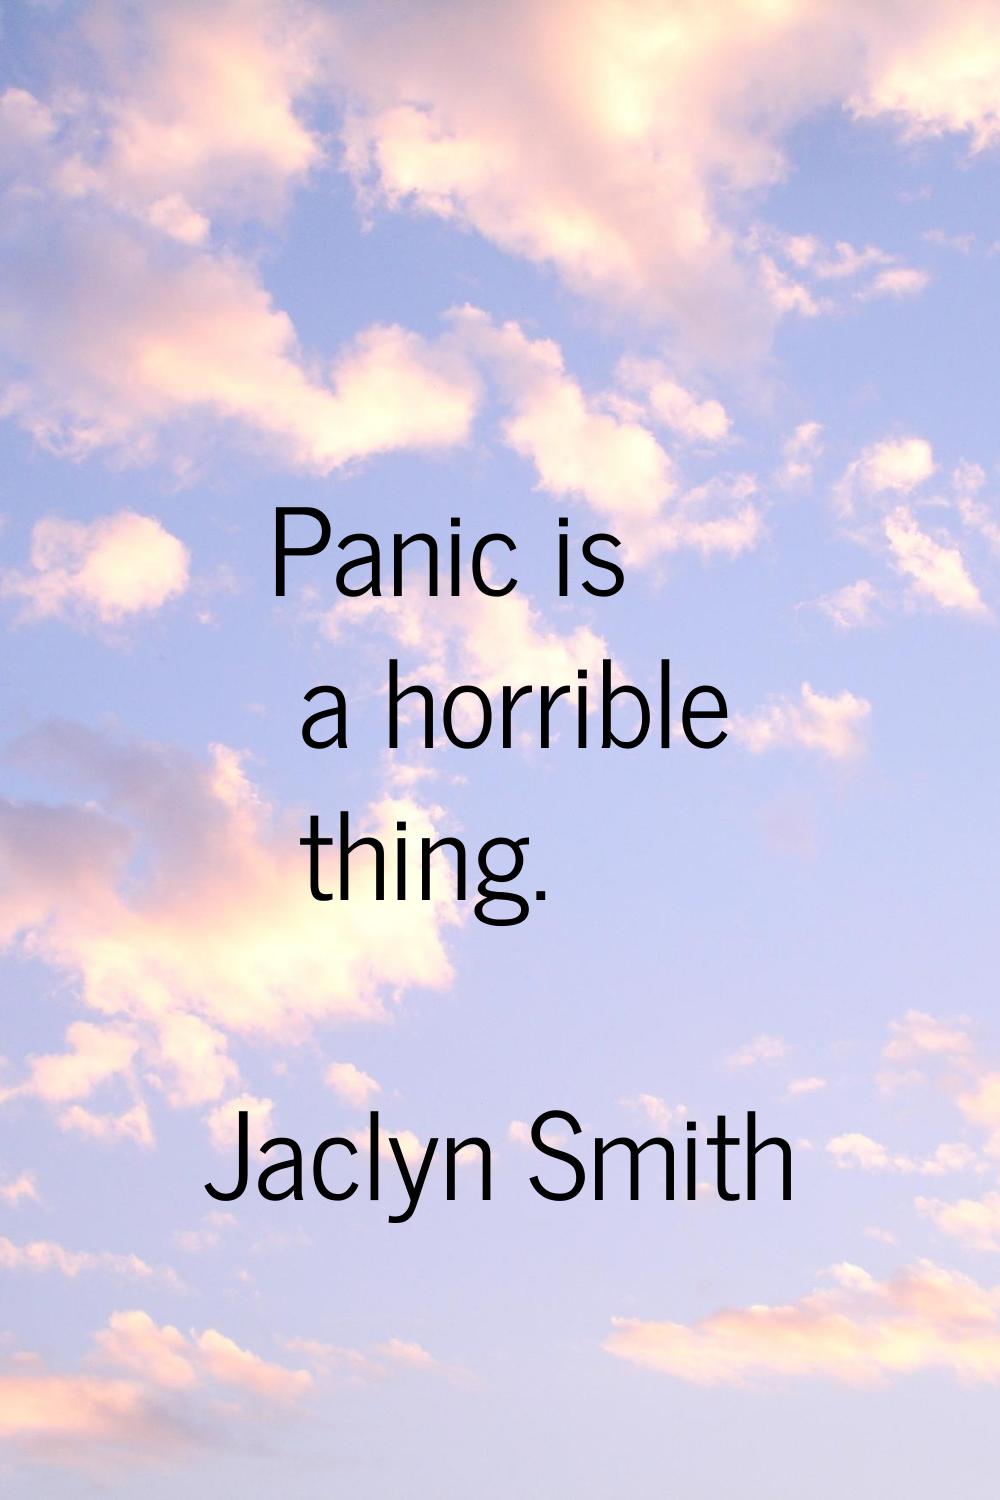 Panic is a horrible thing.